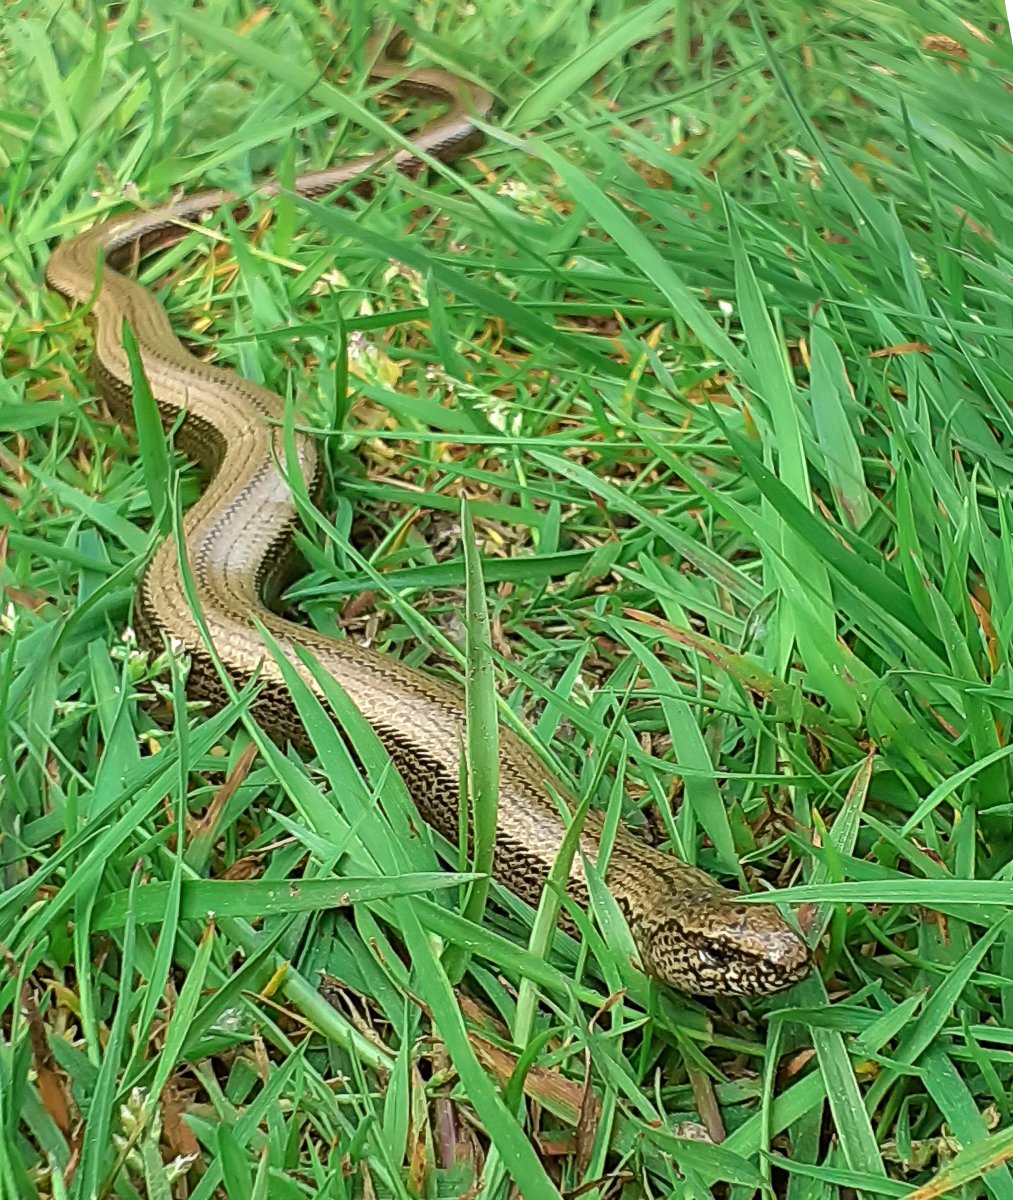 Slow Worm on a dappled woodland ride, Scottshall Coverts in Suffolk yesterday, one of the largest I've seen. @suffolkwildlife @SuffolkAONB @ARGroupsUK